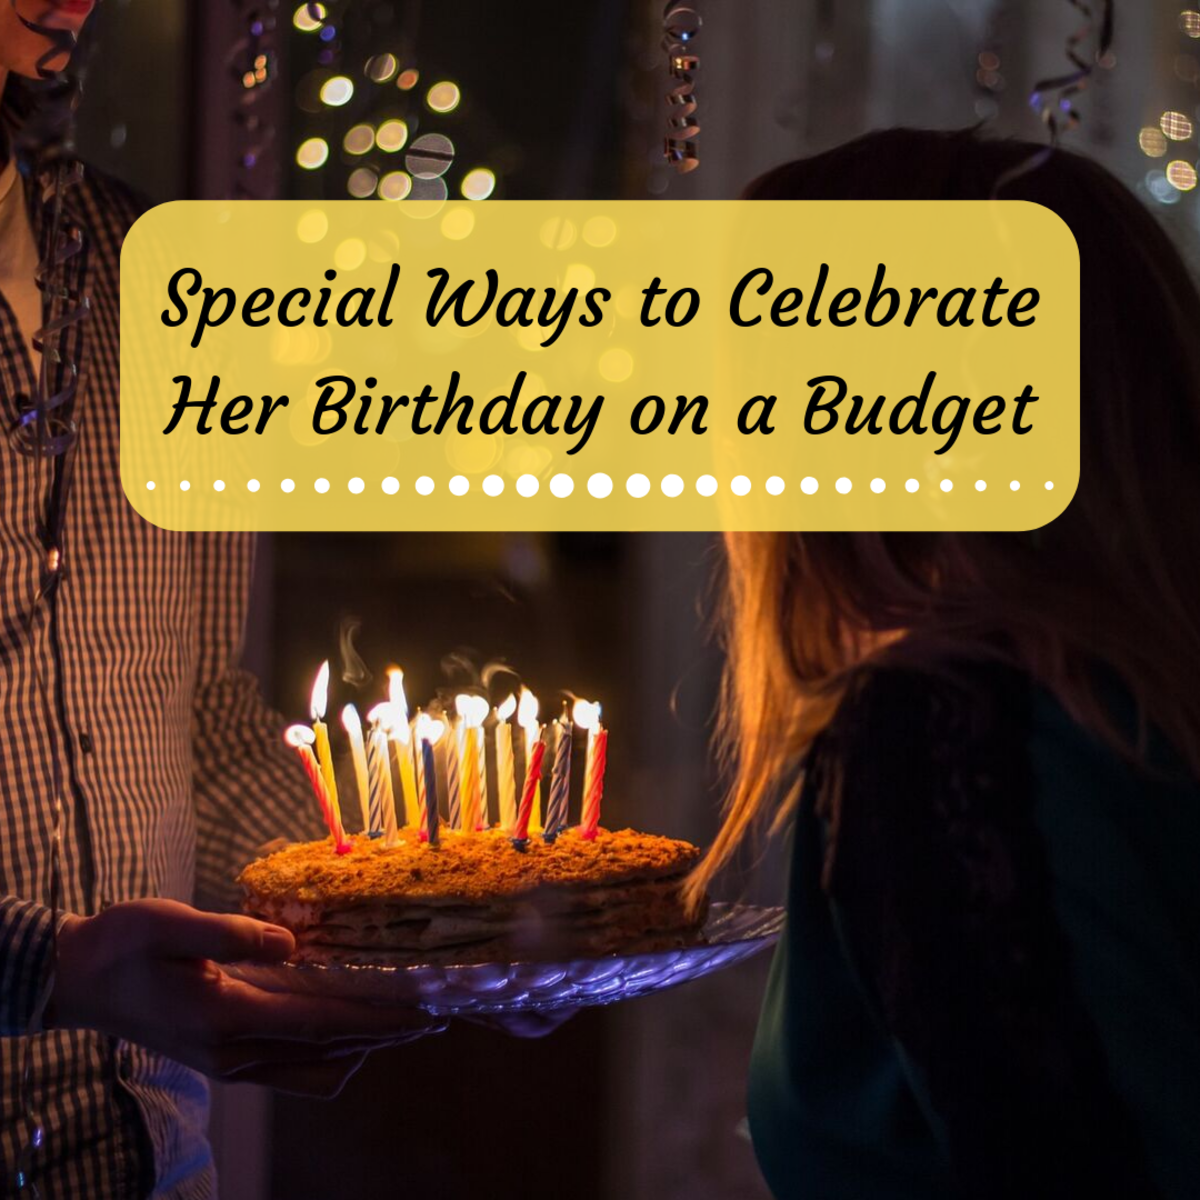 Making Your Wife or Girlfriend's Birthday Special on a Budget